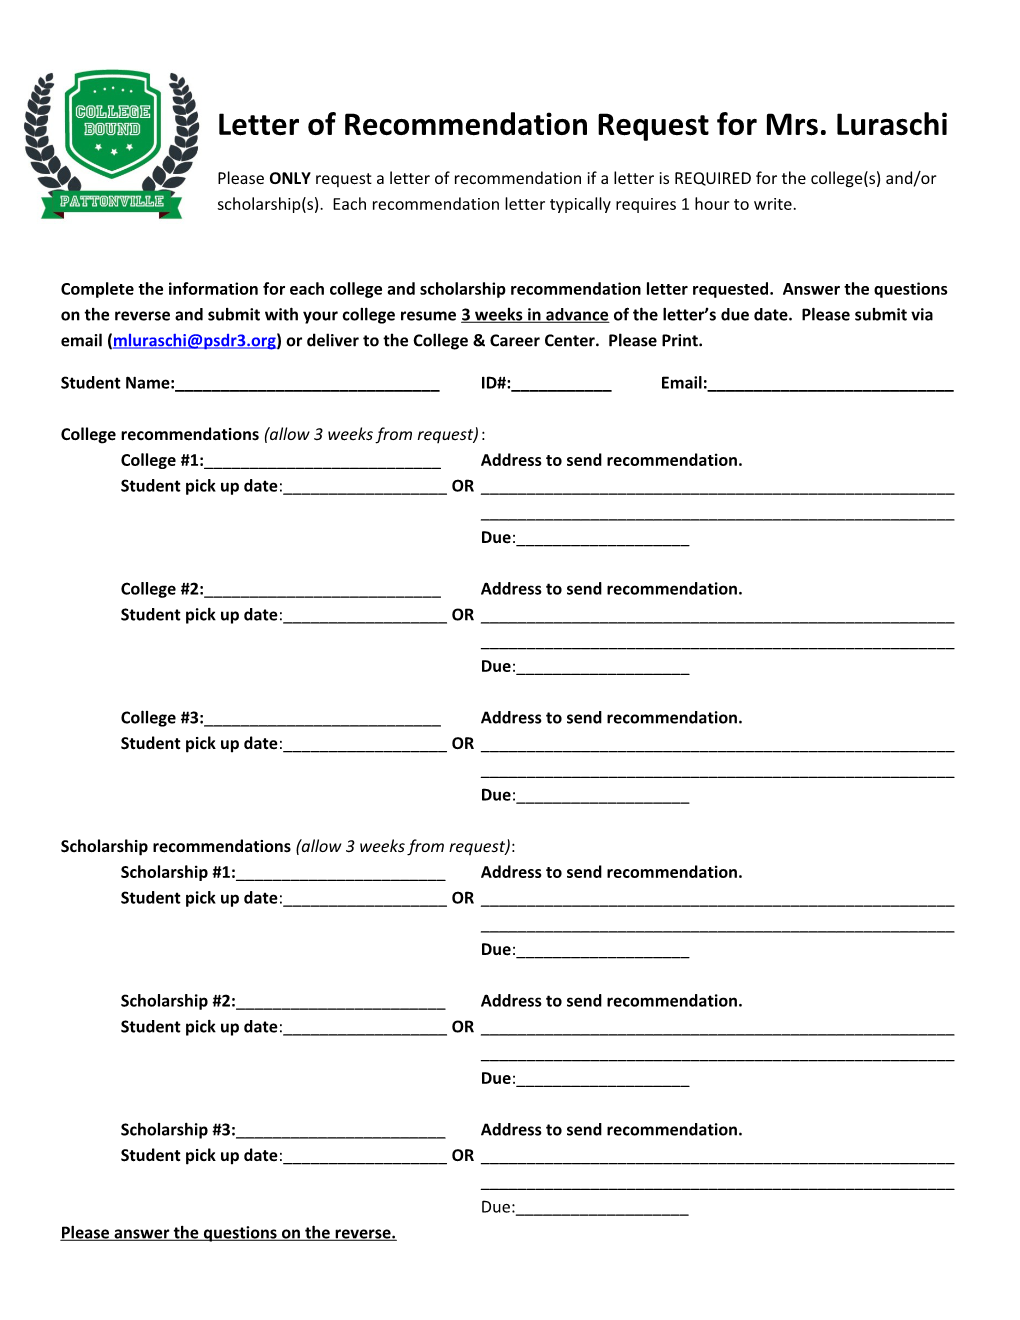 Complete the Information for Each College and Scholarship Recommendation Letter Requested